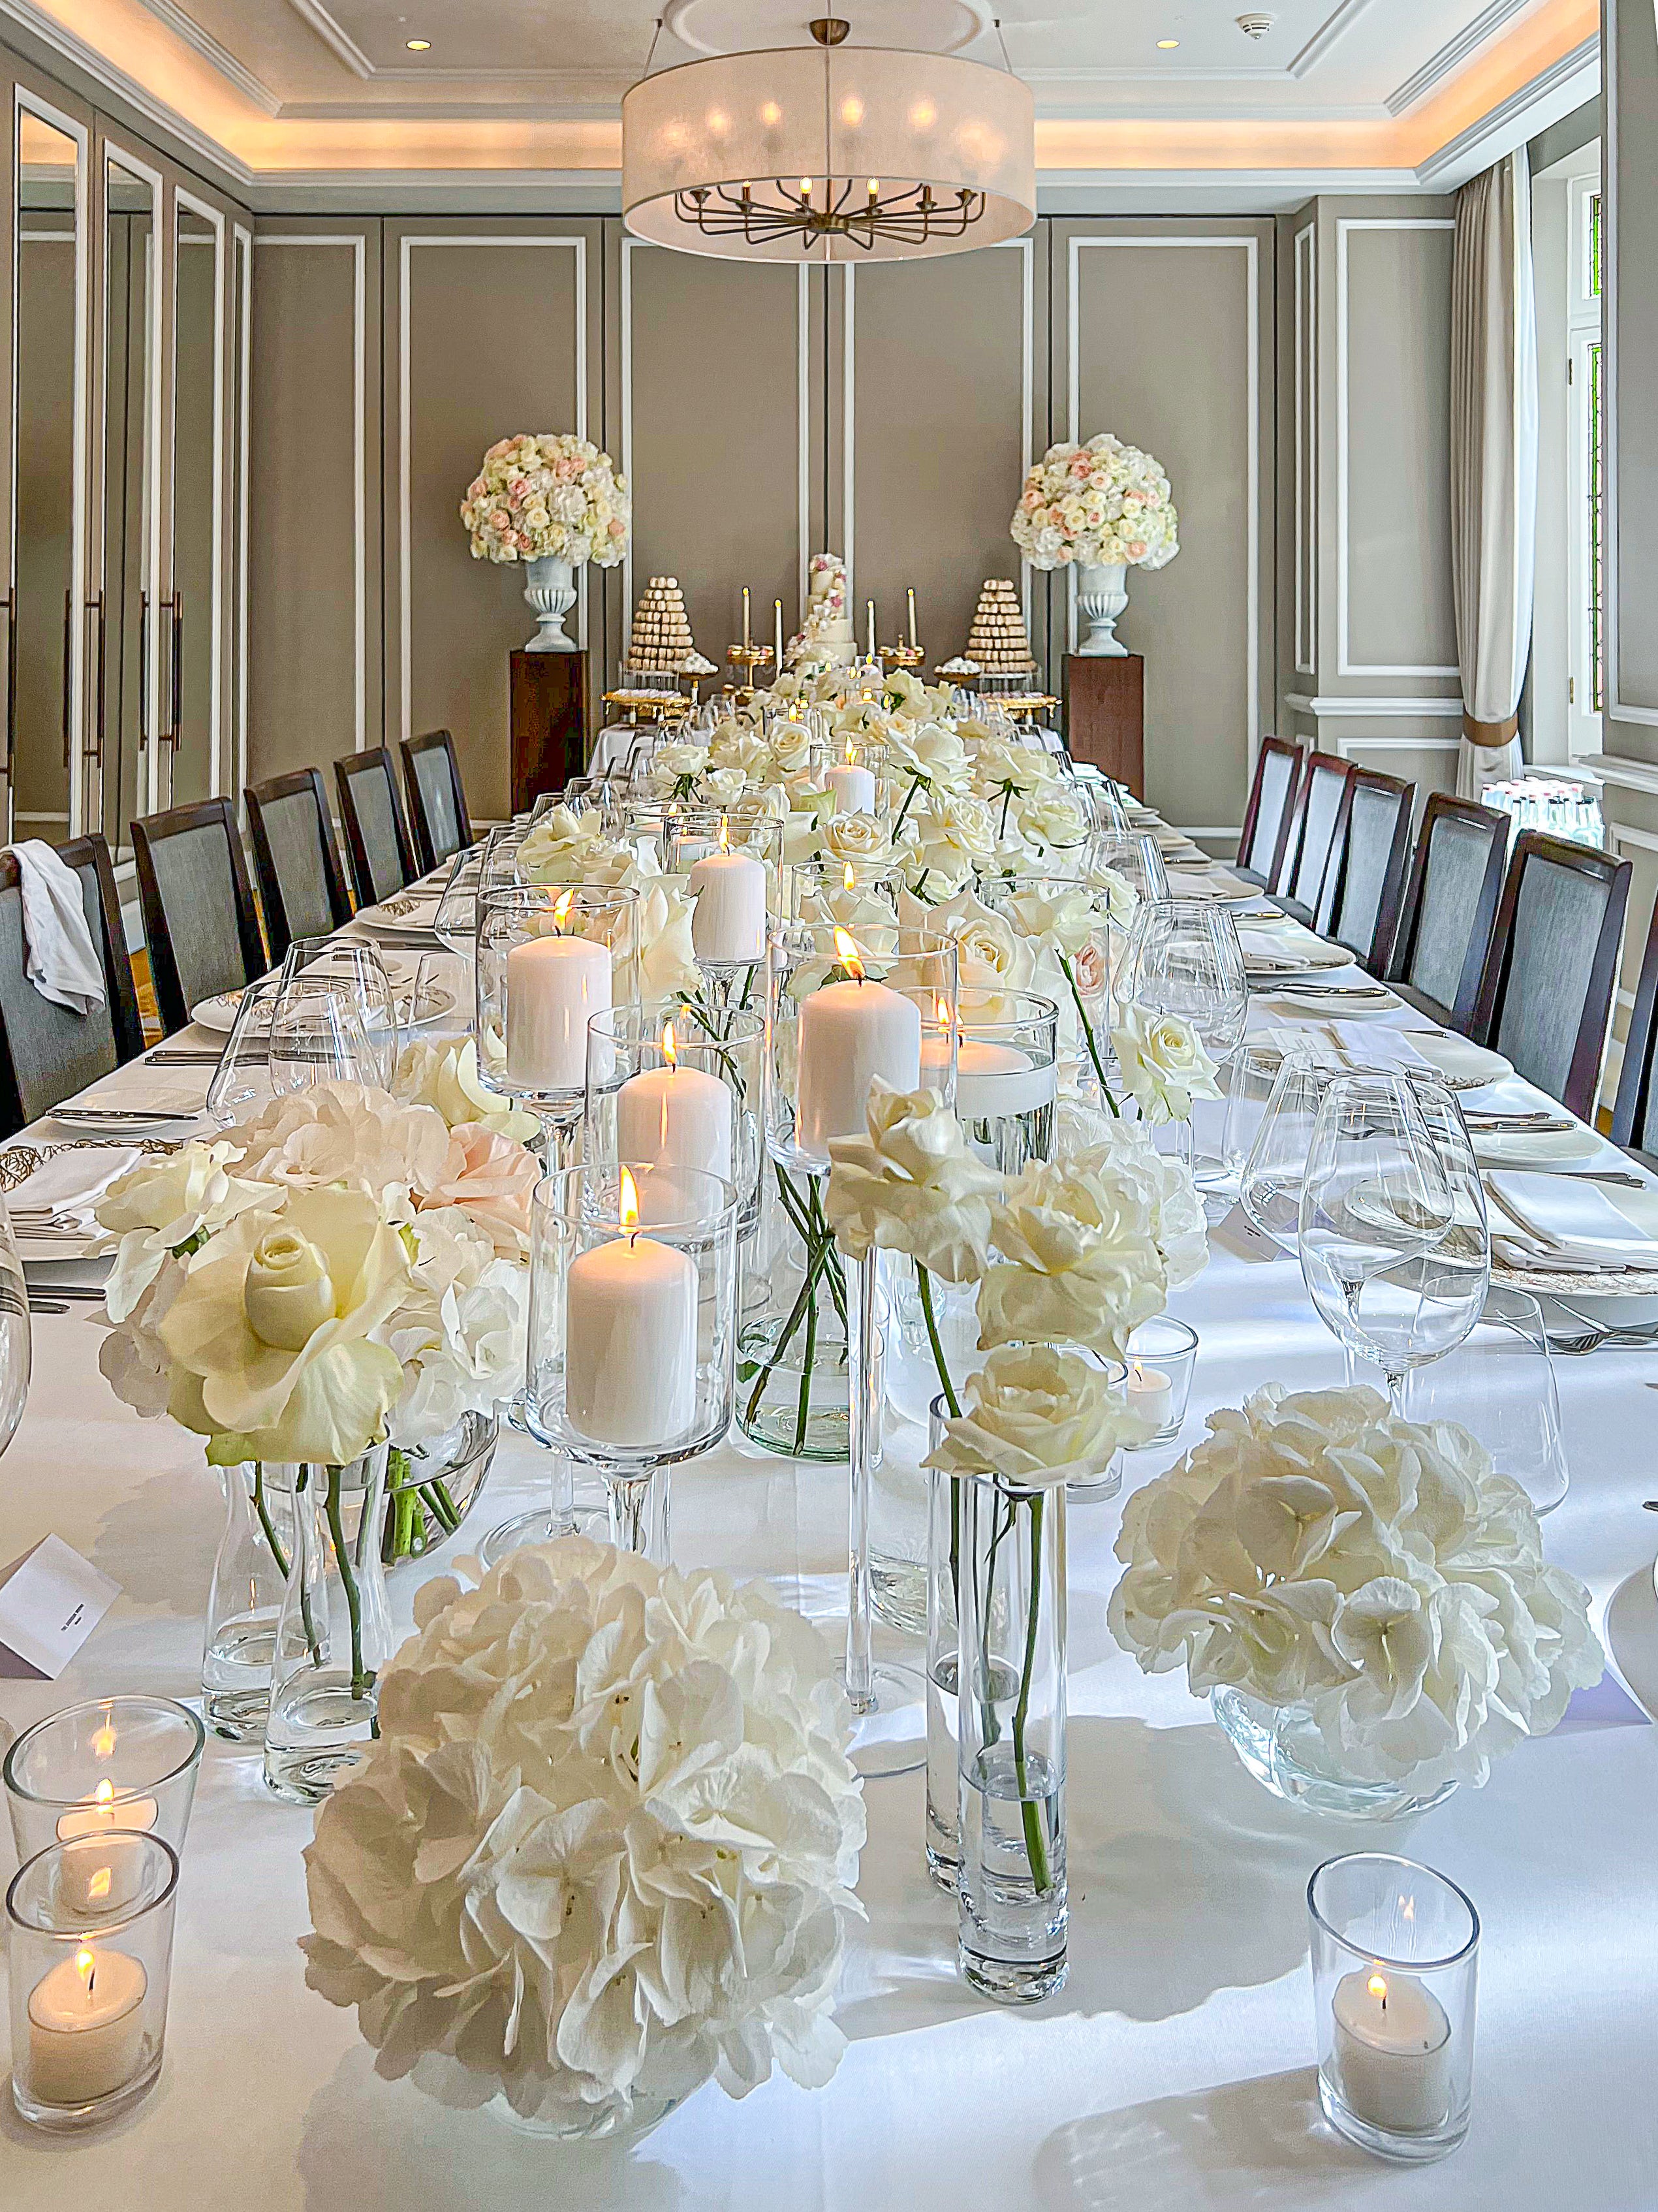 Bespoke Wedding Flowers: White wedding table decorations, flowers created especially for the bride and groom.